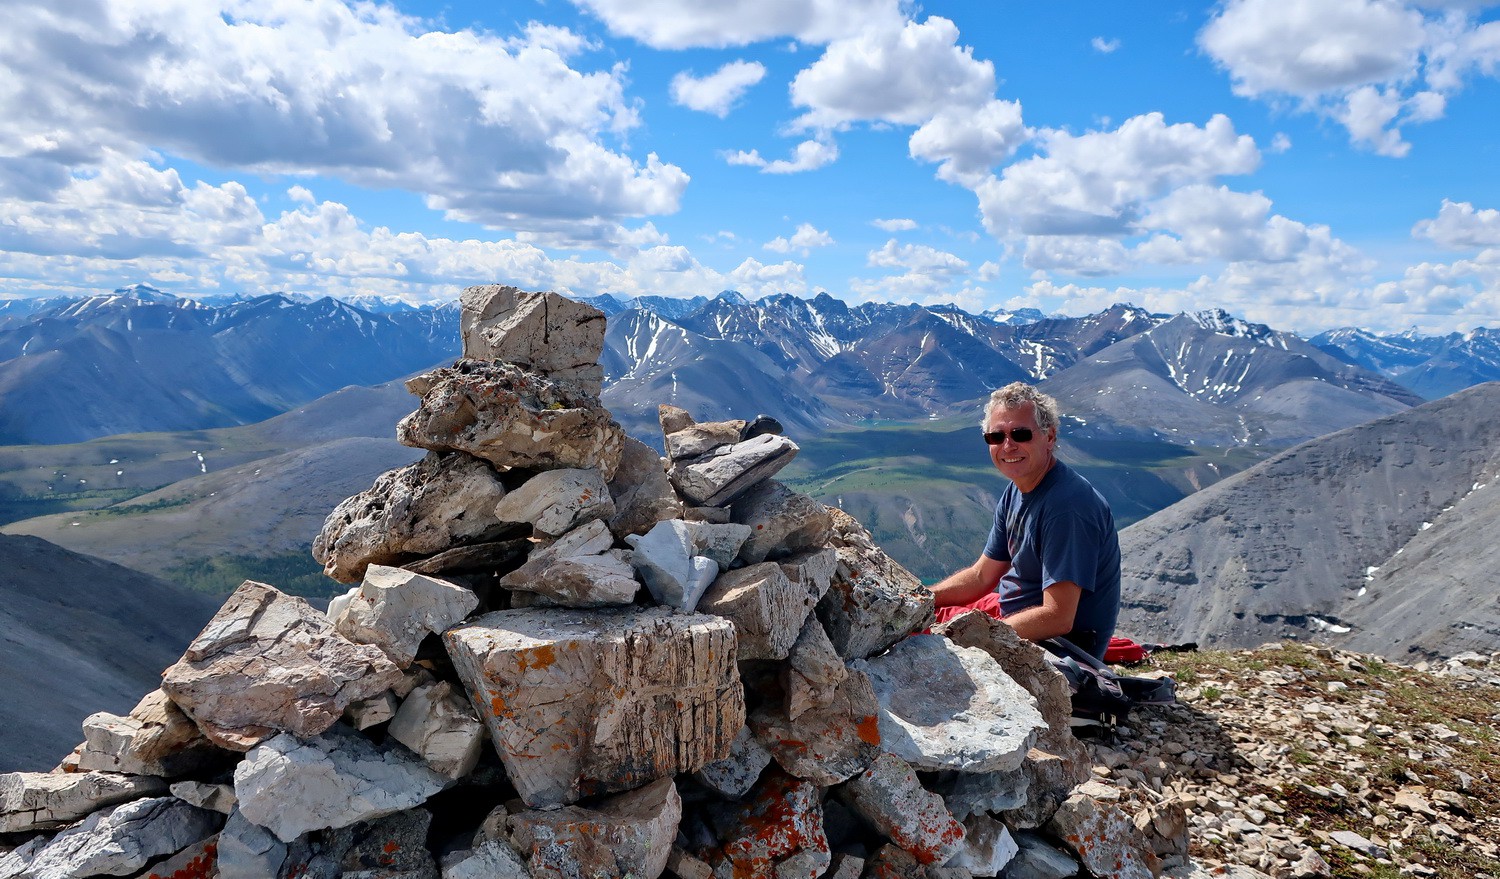 On top of 2010 meters high Summit peak in the very northern Rocky Mountains